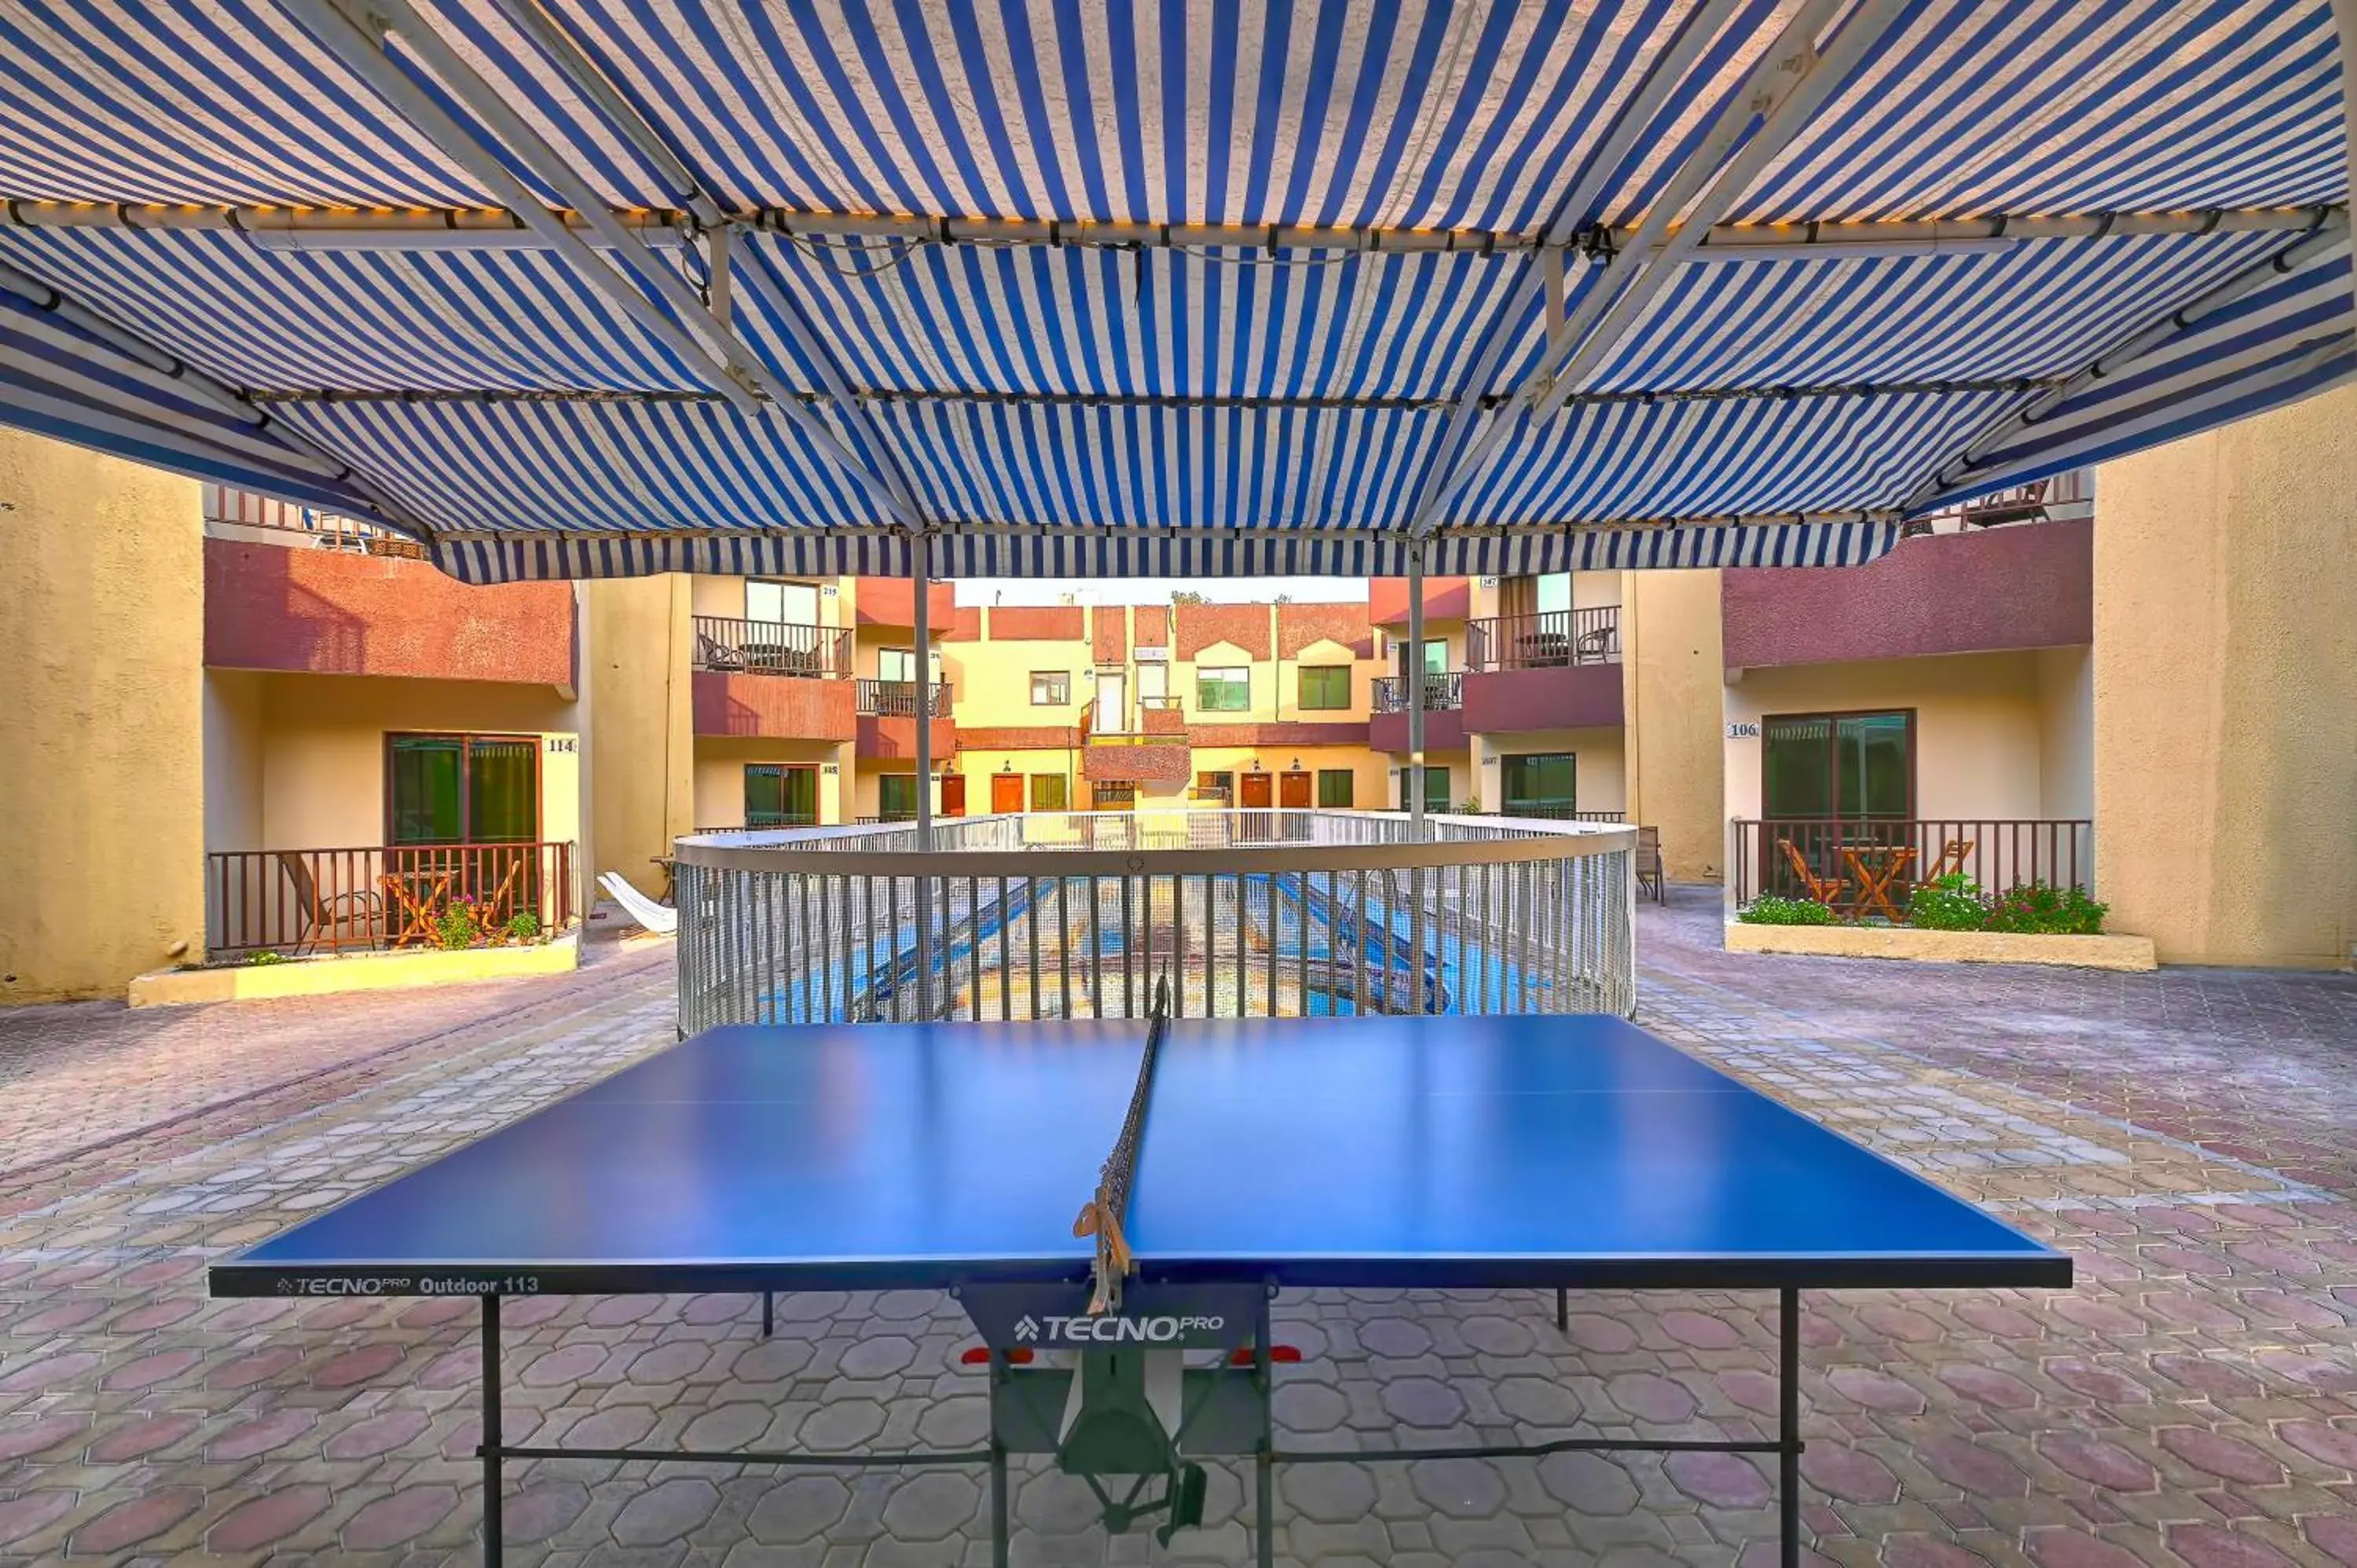 Table Tennis in Summerland Motel